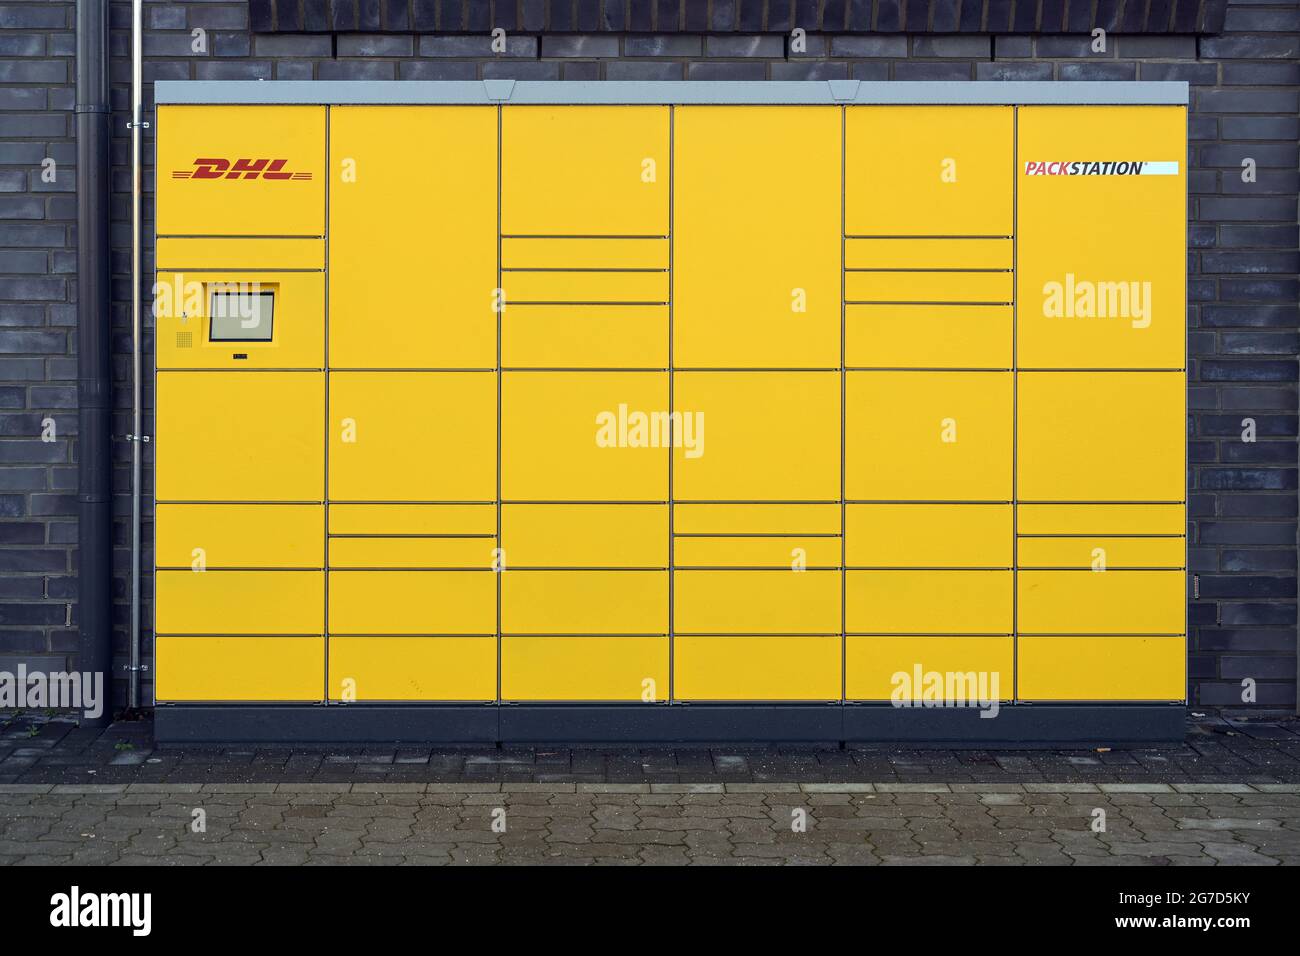 Ratzeburg, Germany, January 12, 2021: Front view of a DHL Packstation  (packing station) with boxes where customers can send and pick up their  packages Stock Photo - Alamy